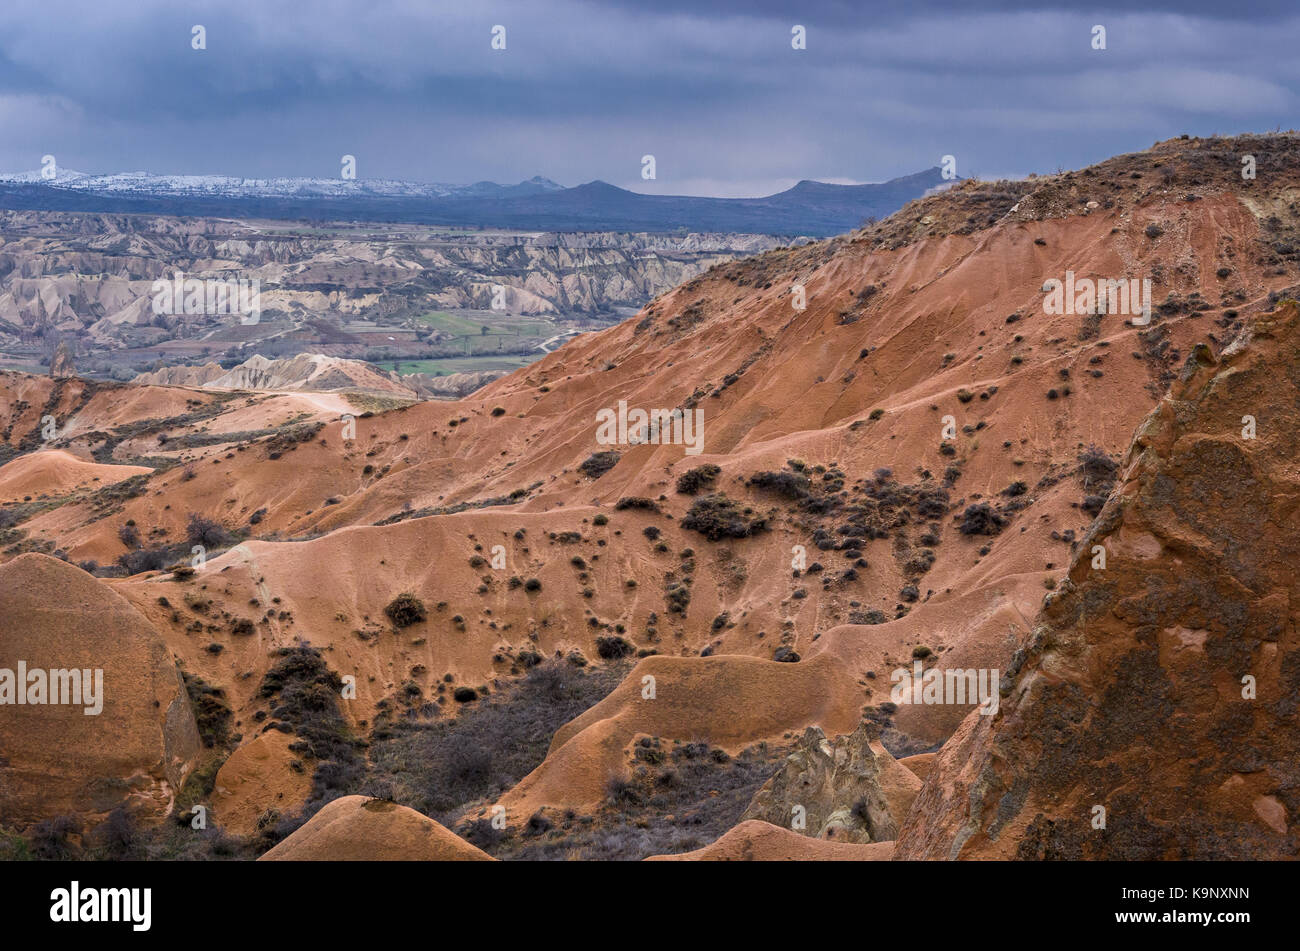 Dramatic landscape of Red valley in Cappadocia, Turkey Stock Photo